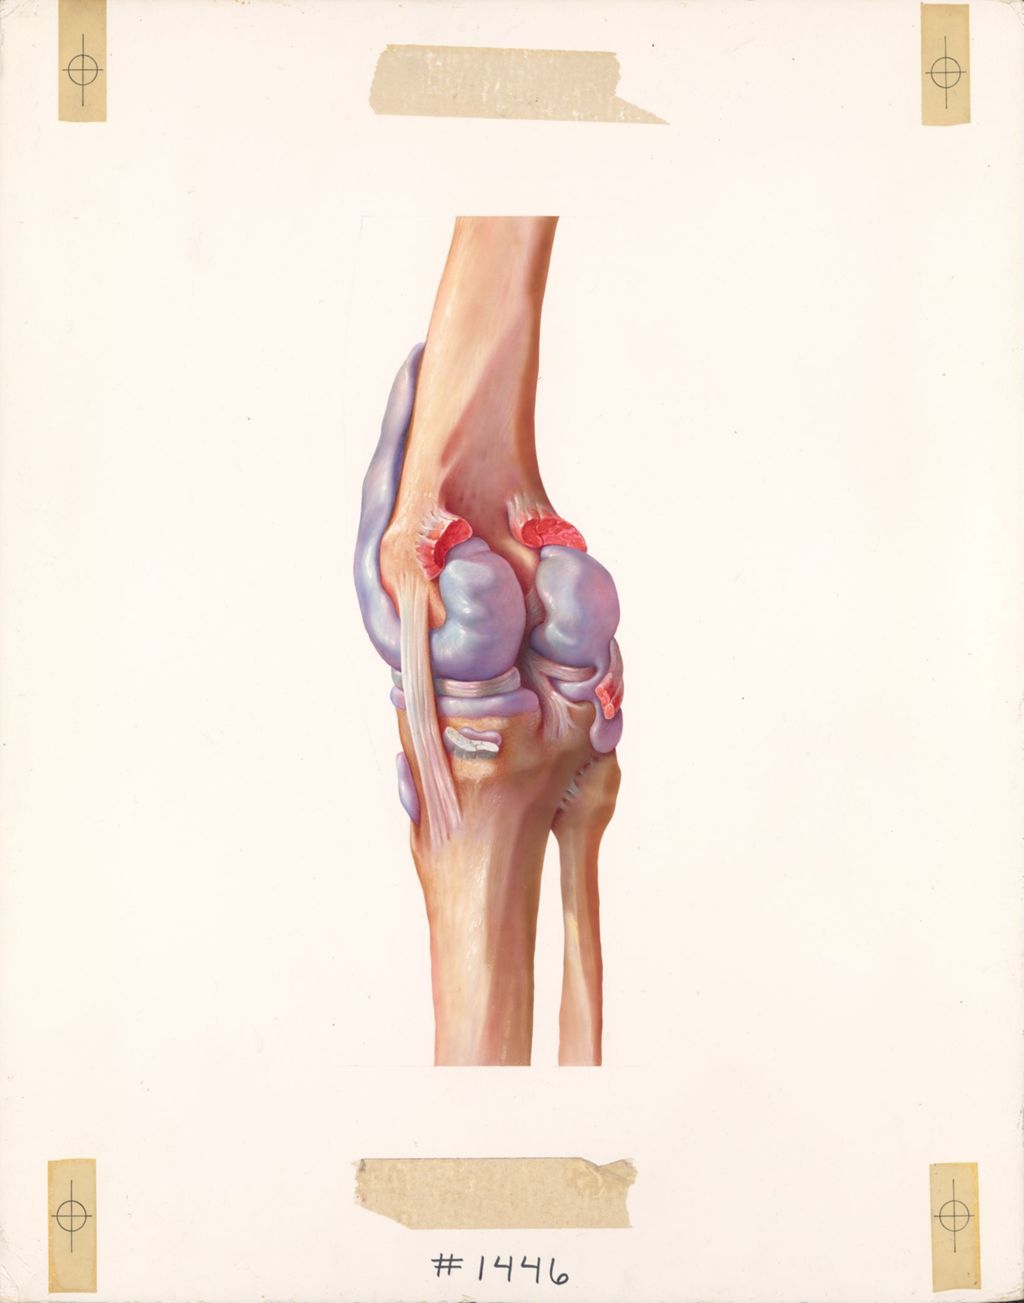 Miniature of The knee, the synovial and bursae of the knee, posteromedial aspect